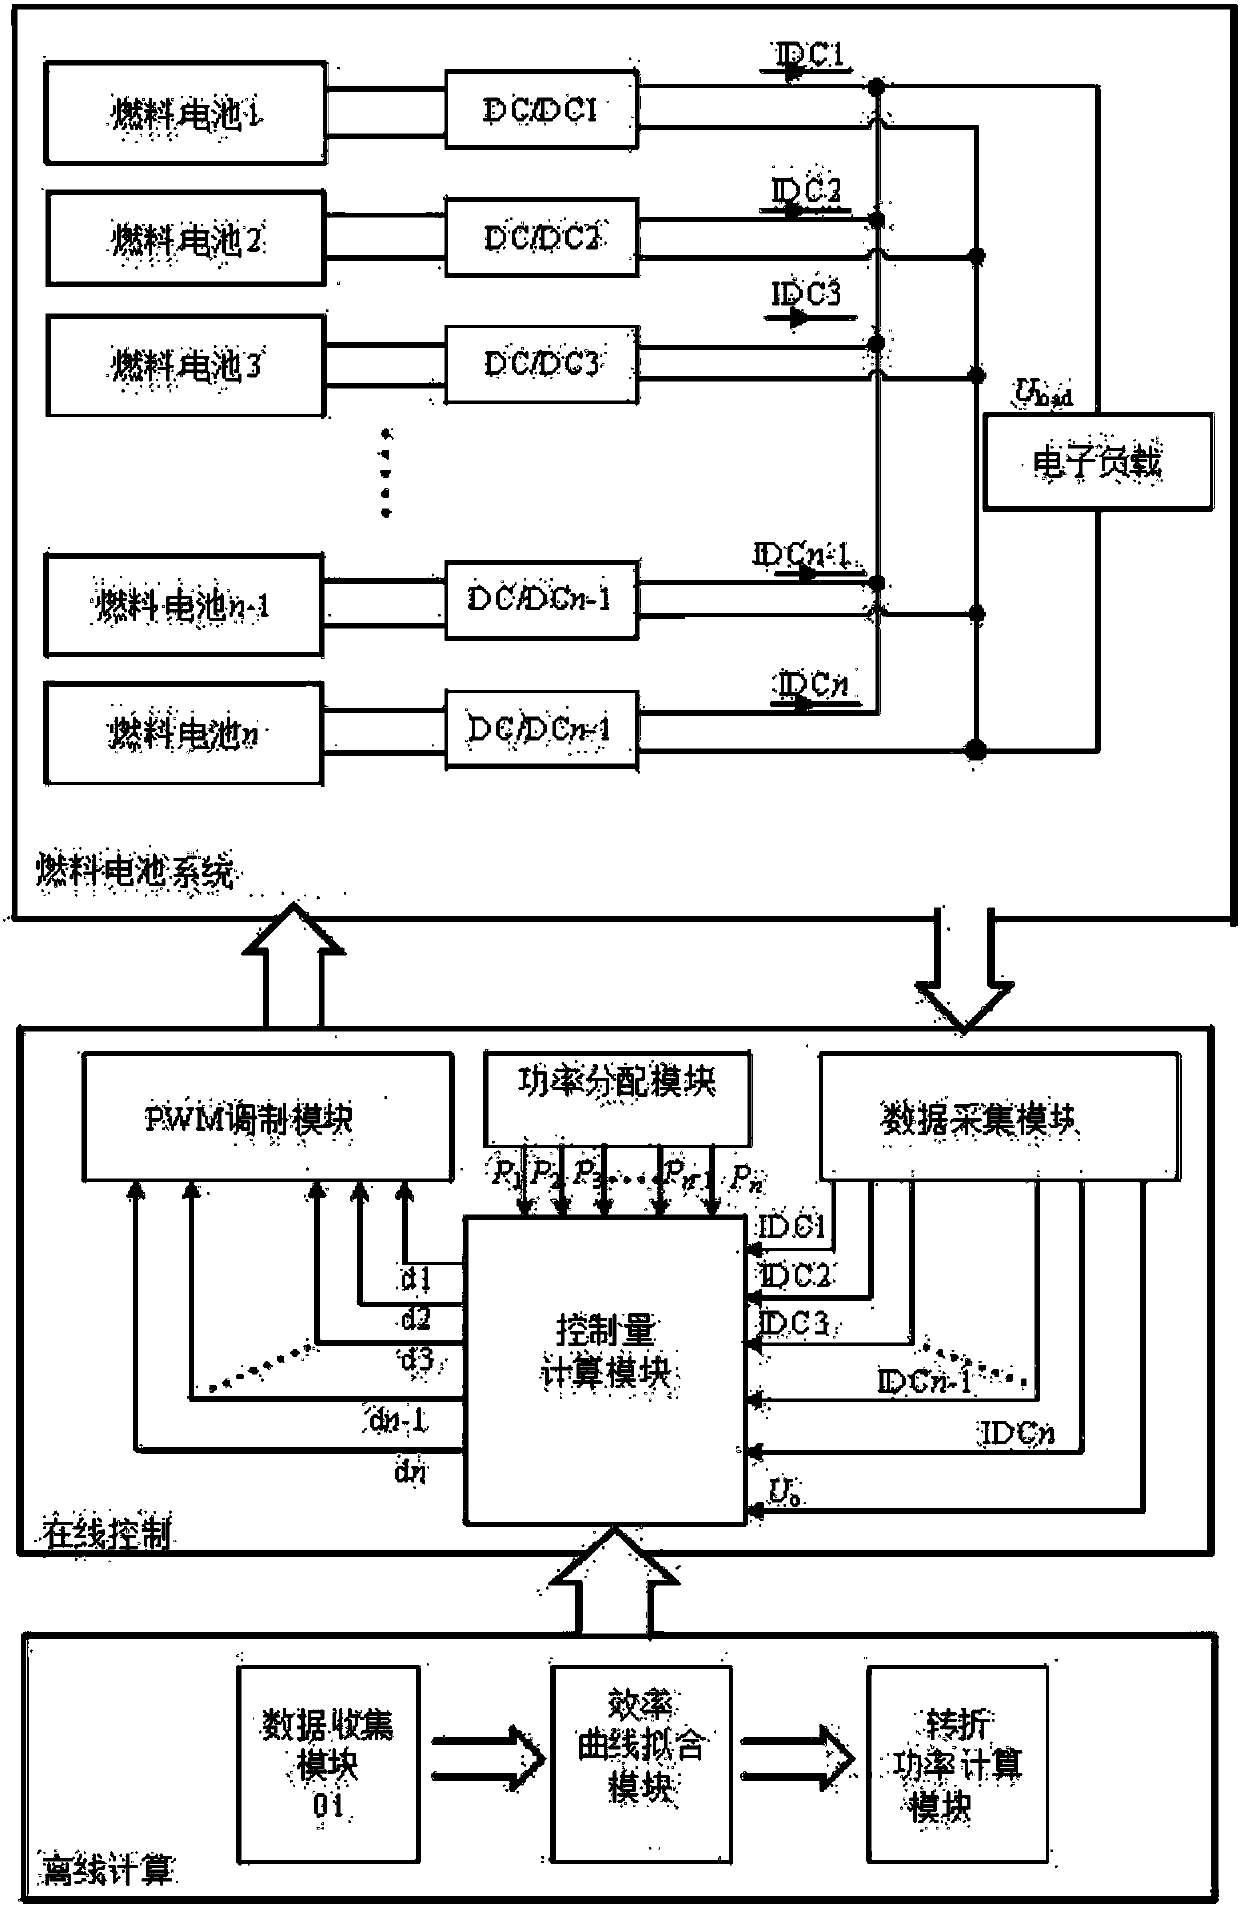 Efficiency optimization control method of fuel cell array system for tramcar